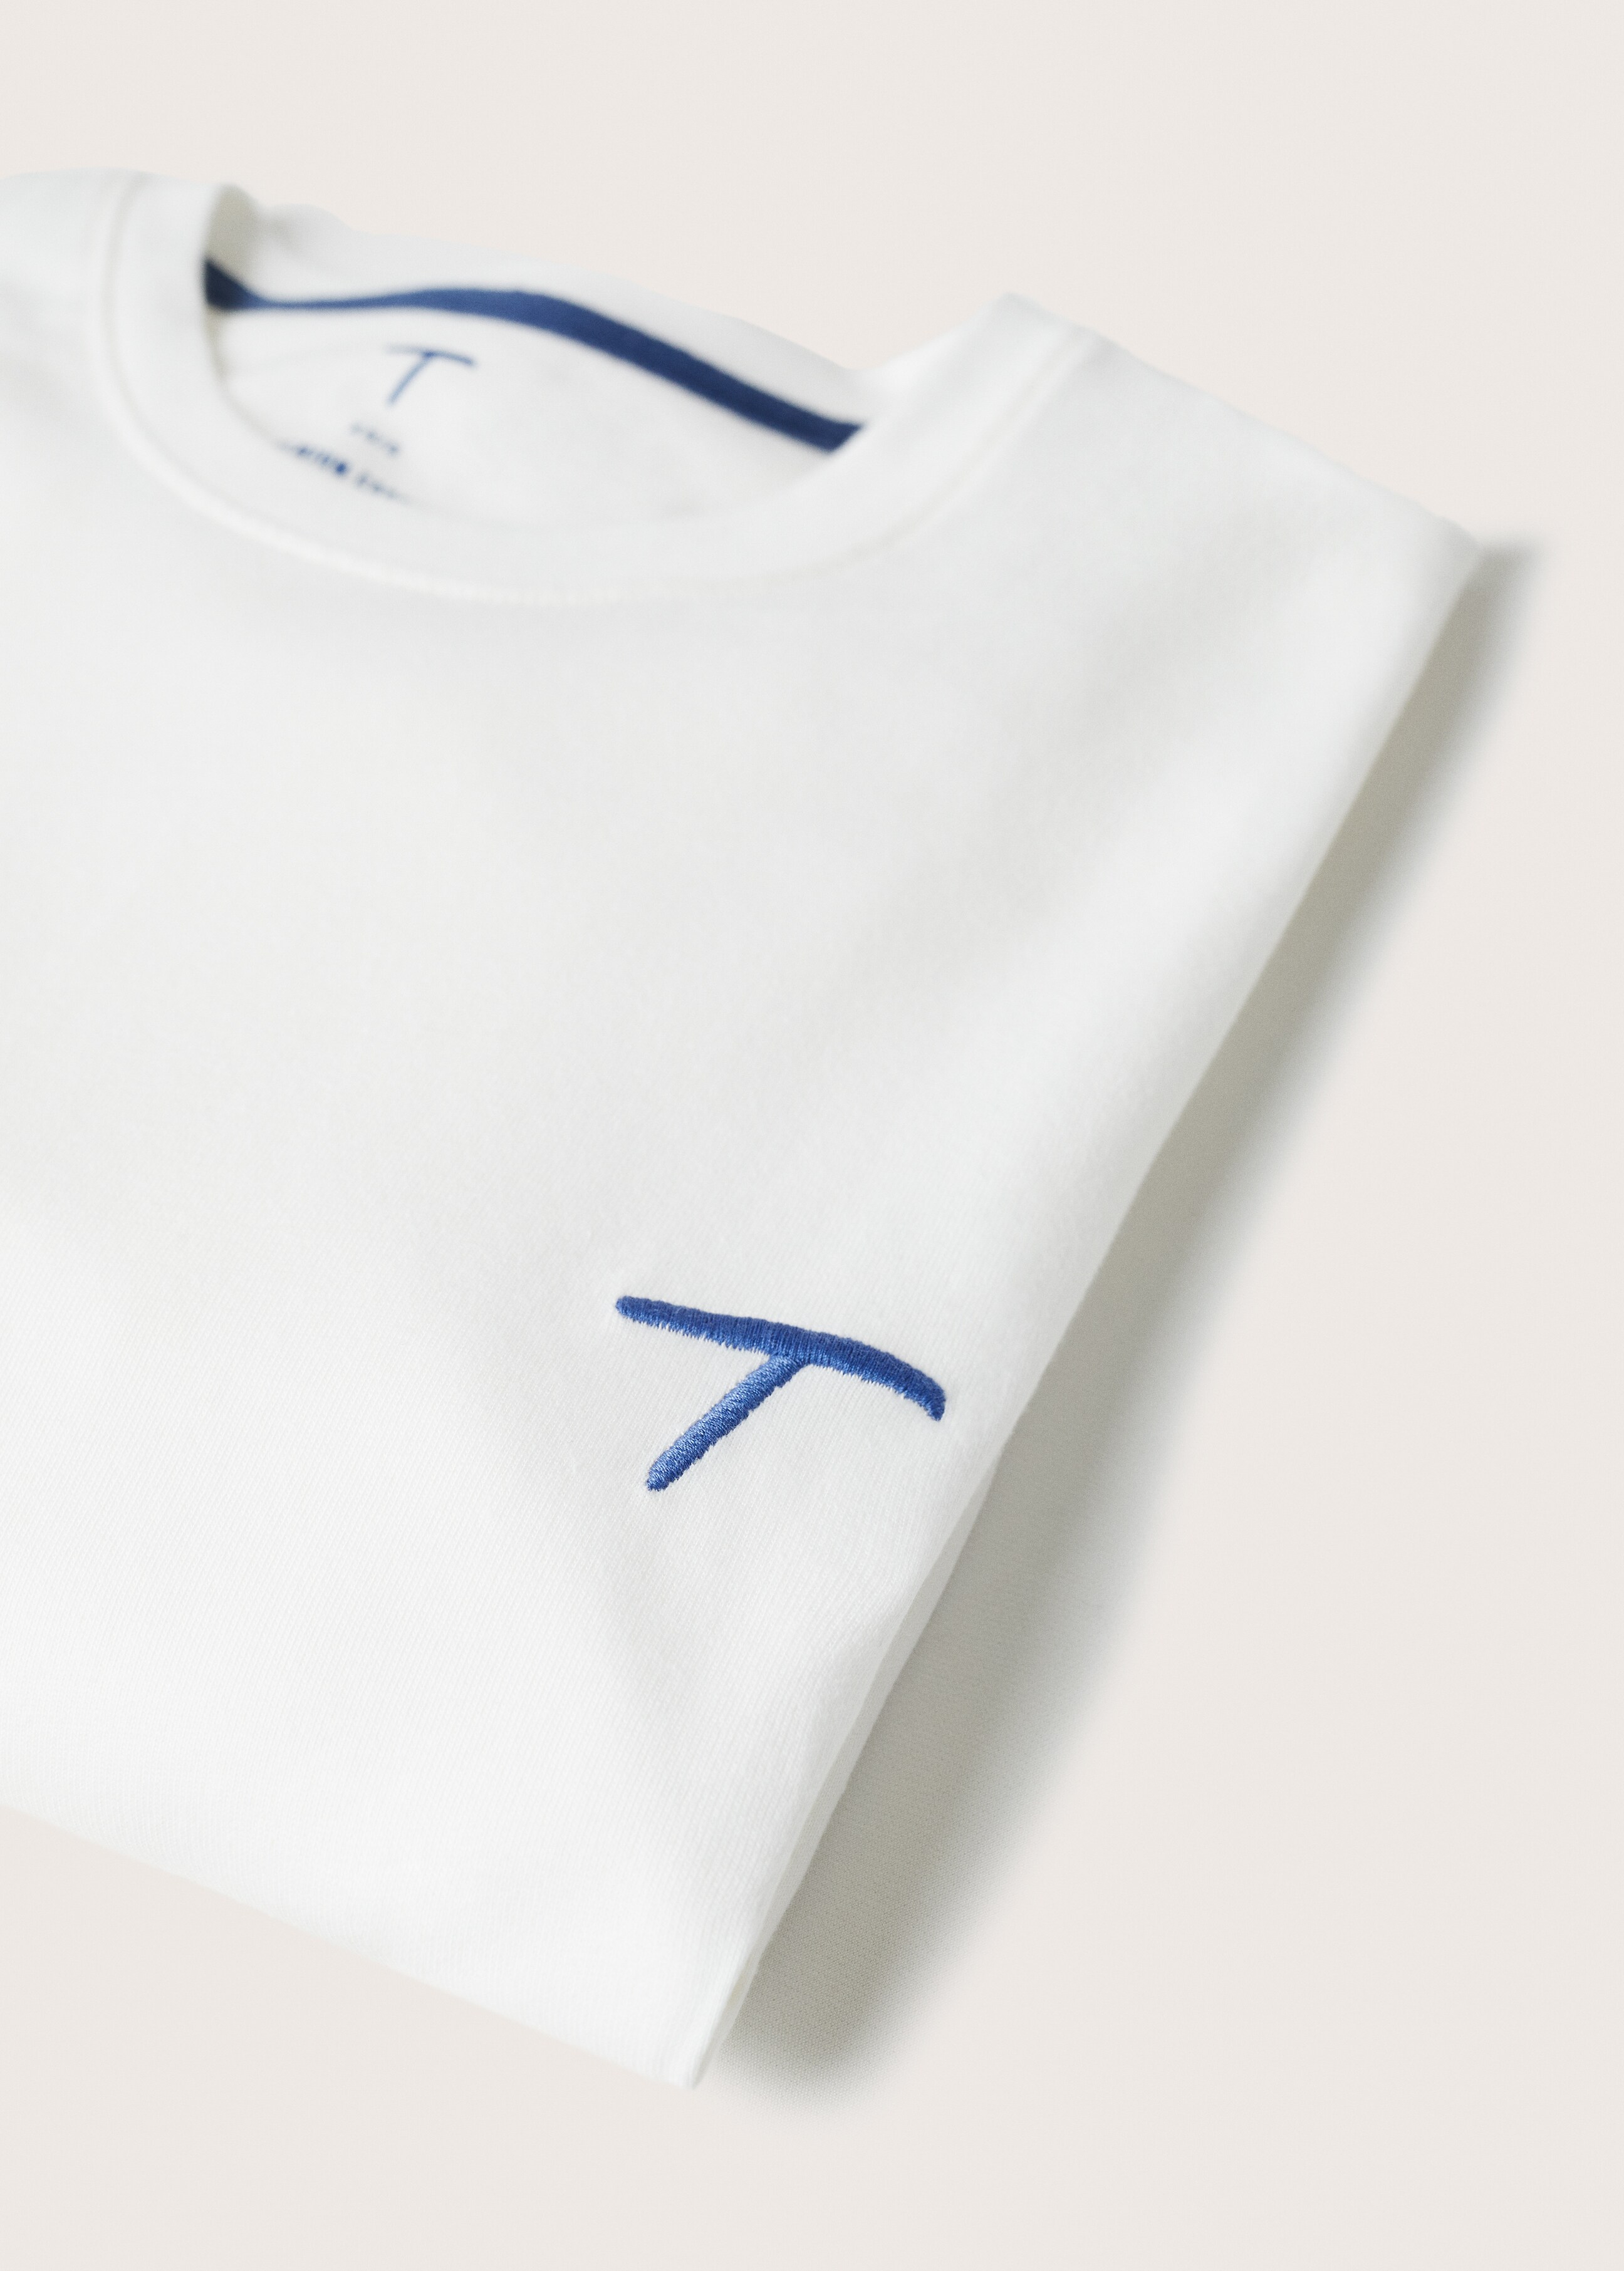 T Collection t-shirt - Details of the article 8